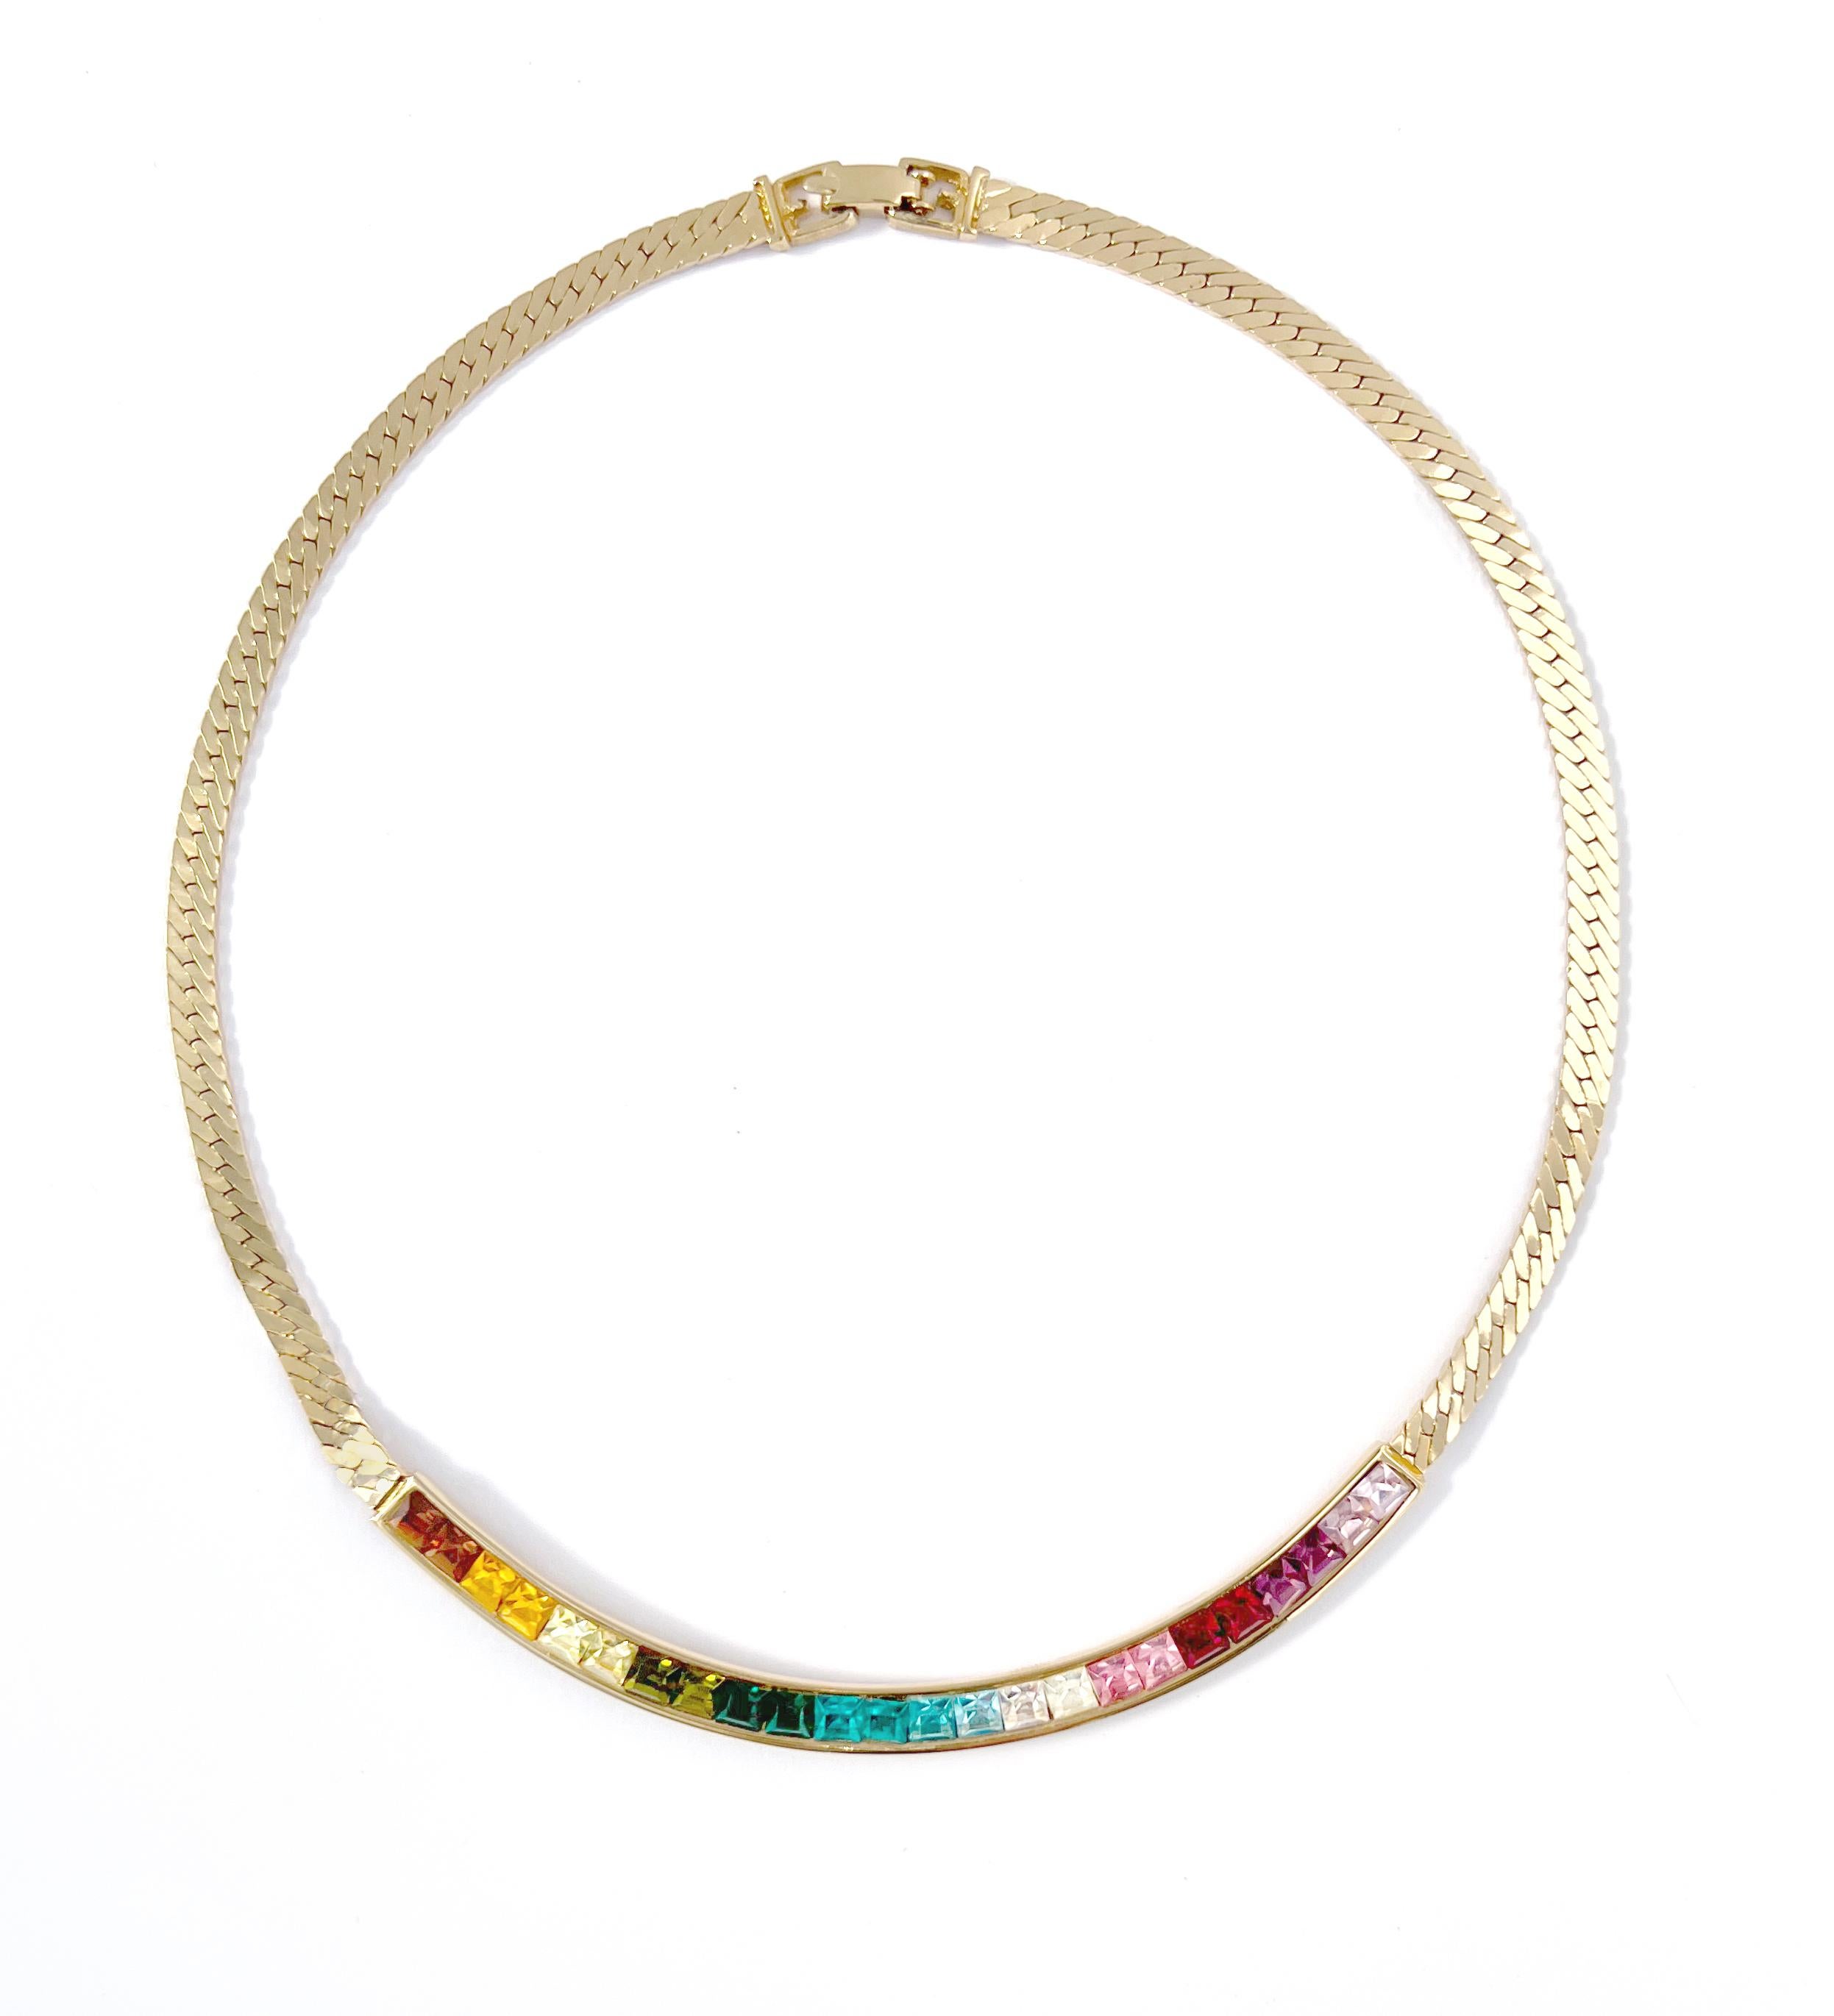 Princess Cut Vintage Givenchy Rainbow Ombre Crystal Herringbone Chain Necklace, 1990s